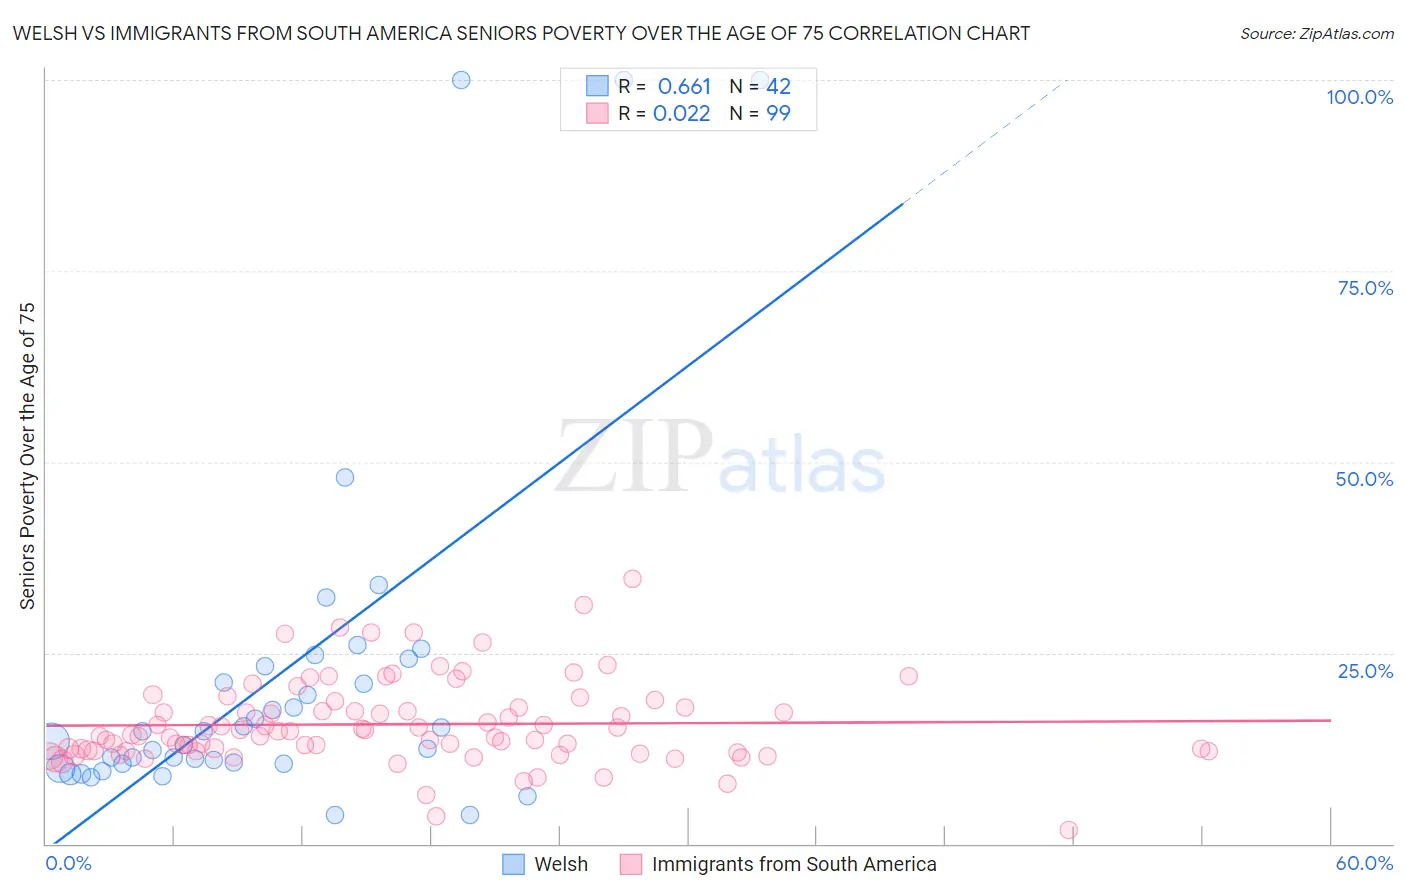 Welsh vs Immigrants from South America Seniors Poverty Over the Age of 75